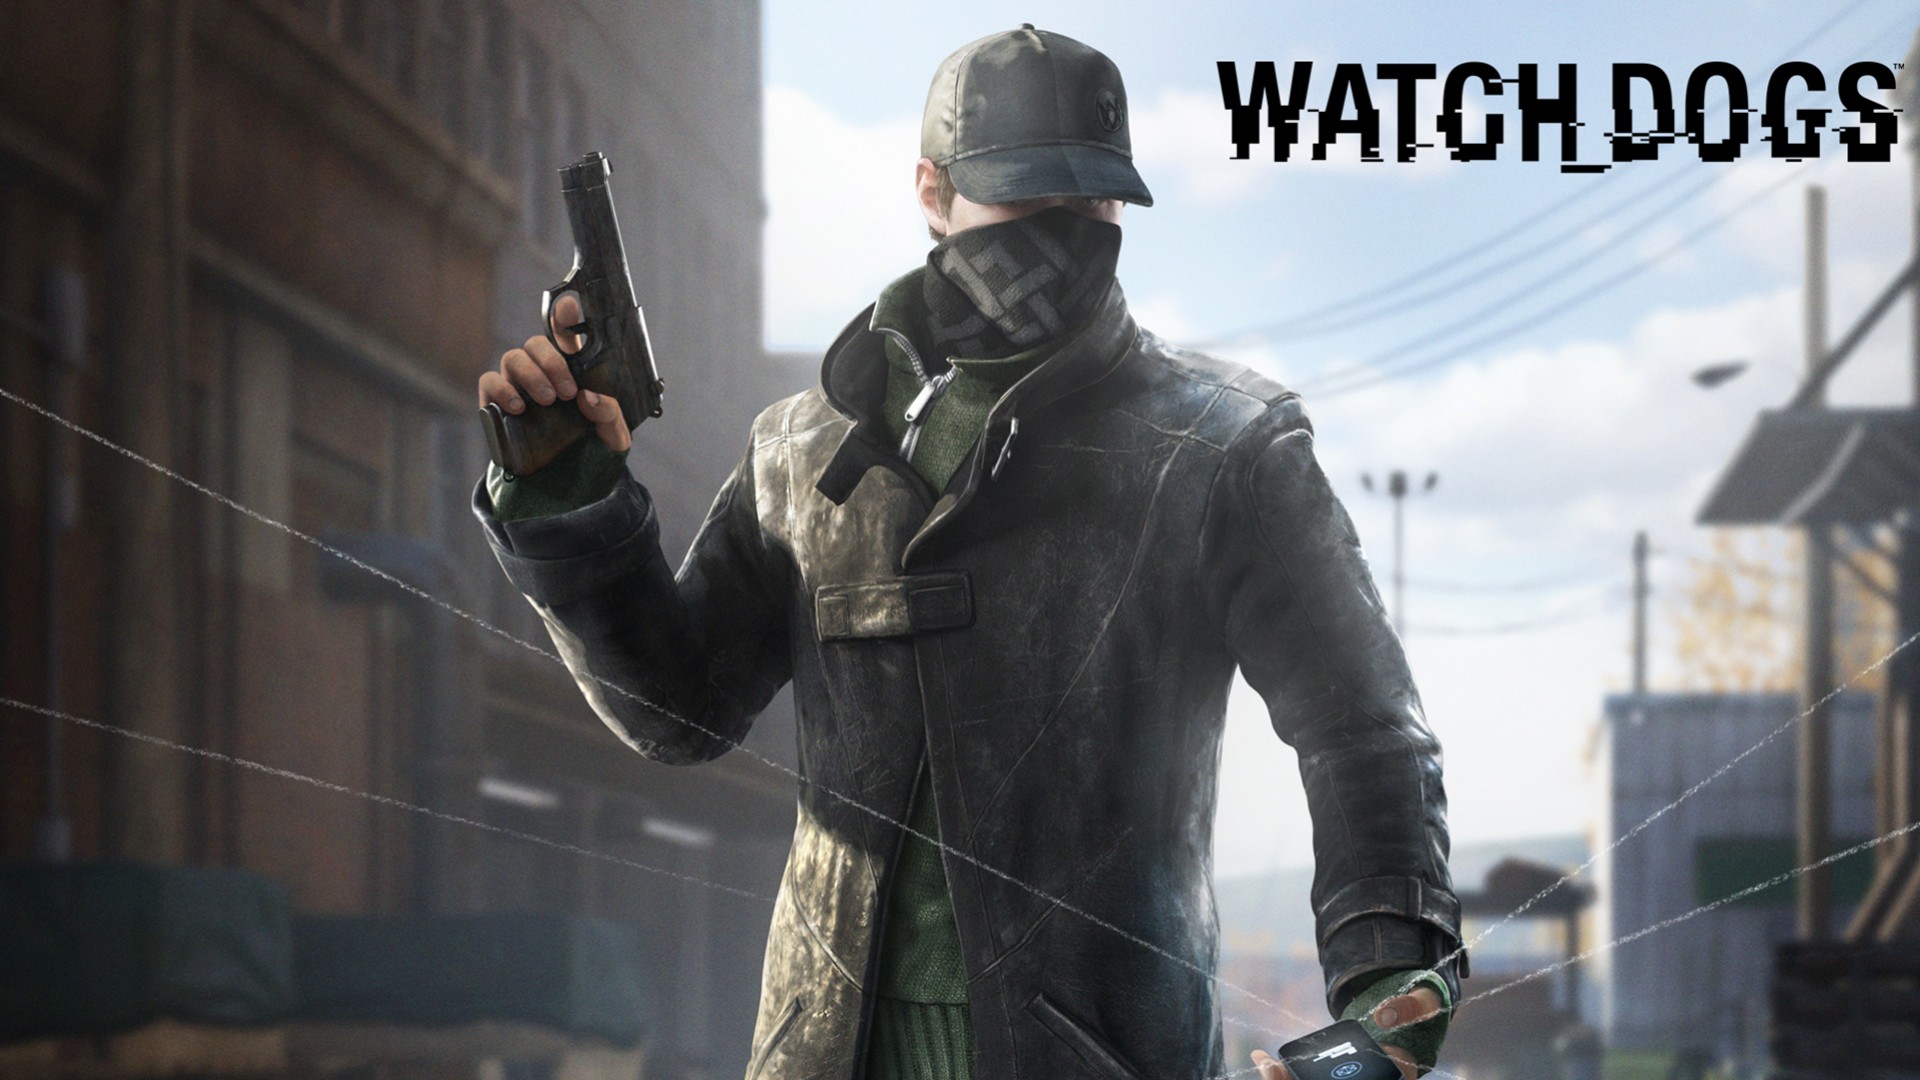 Watch dogs on steam фото 57